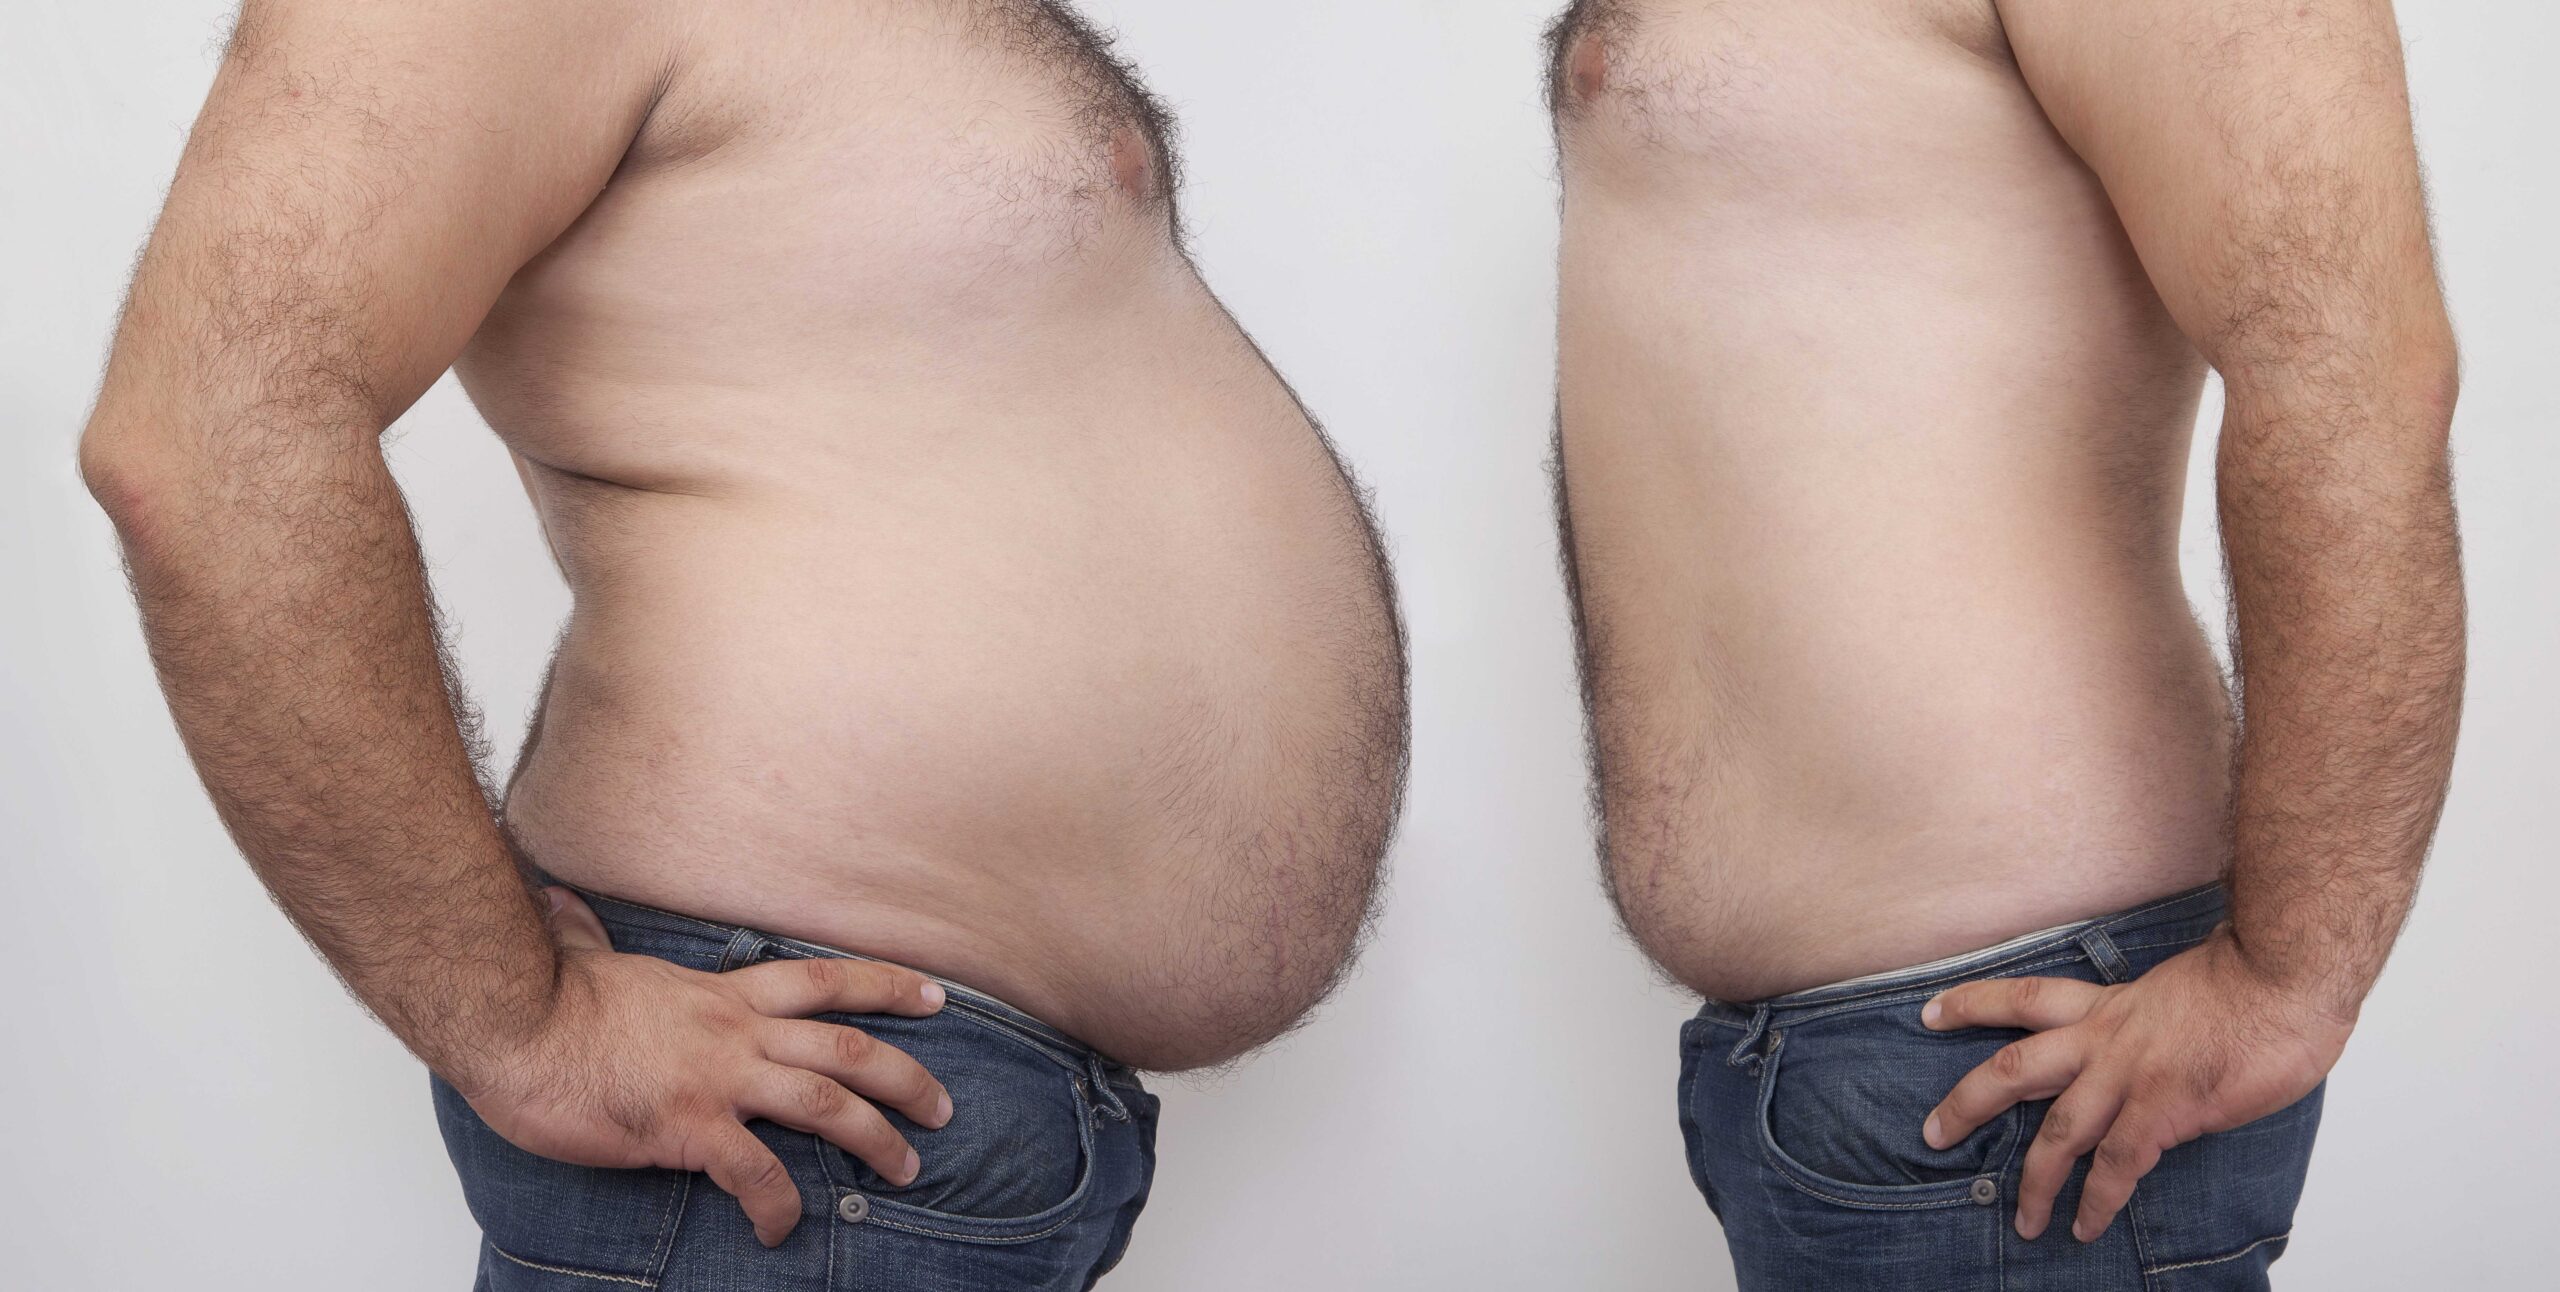 before and after comparison of a man who received body contouring surgery after weight loss